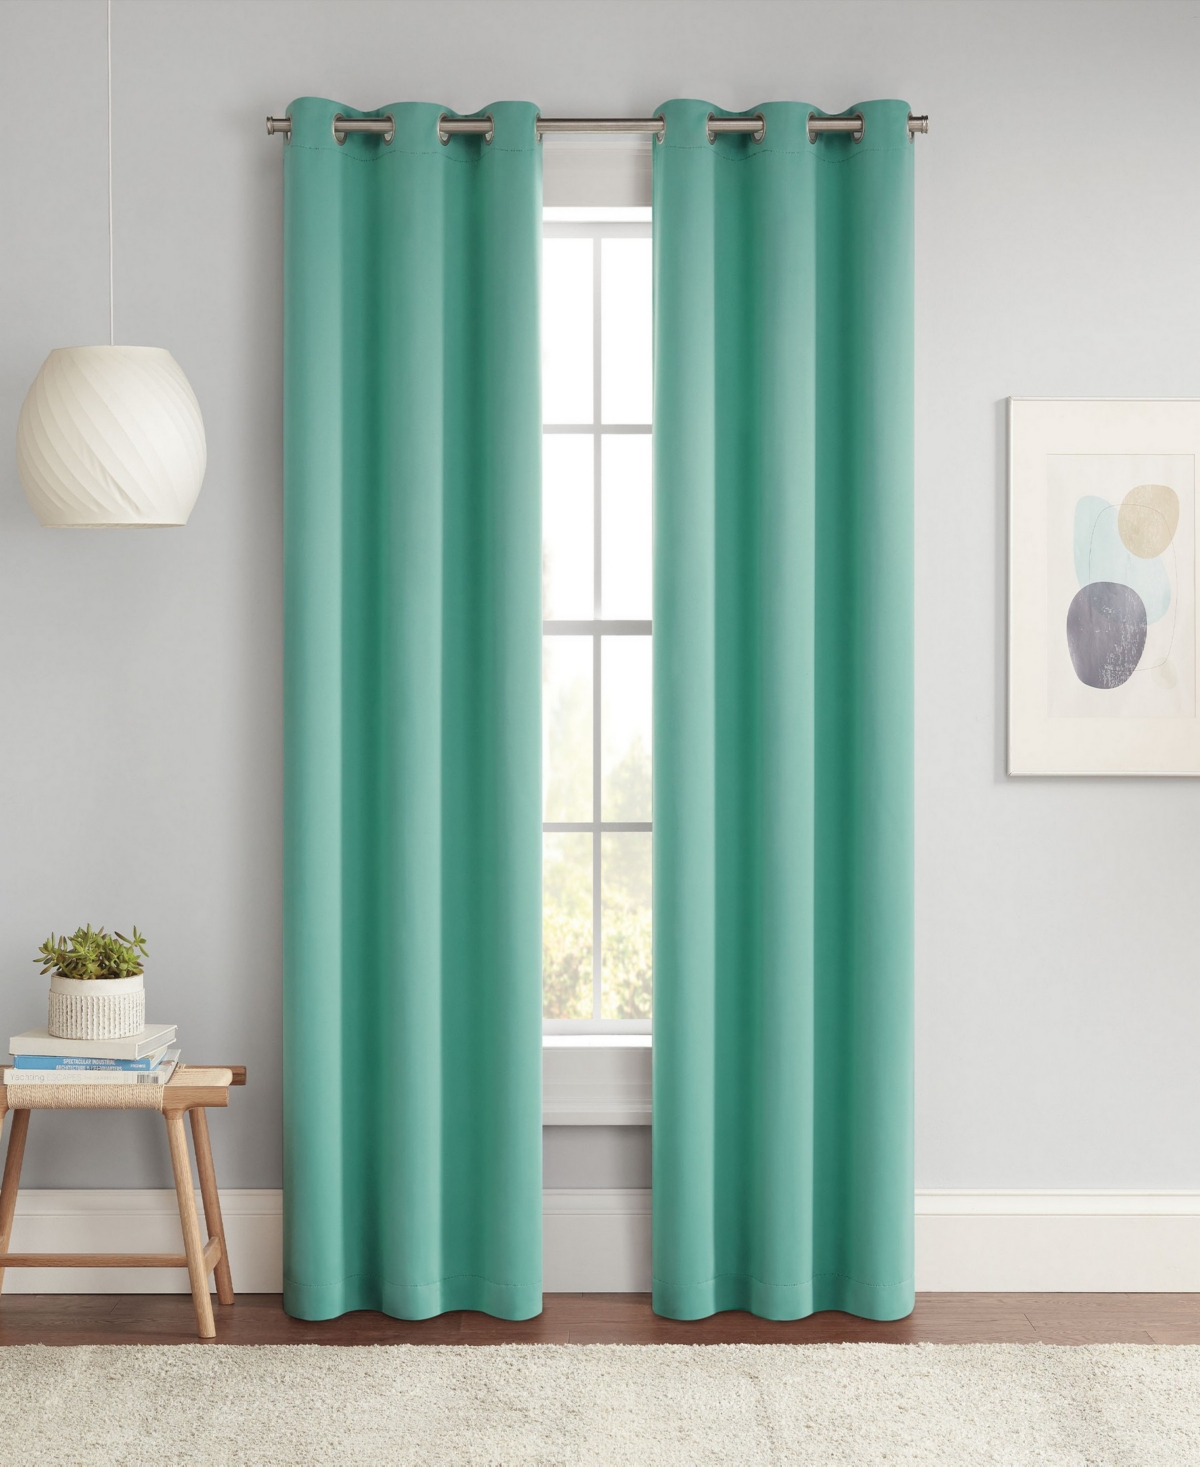 Eclipse Darrell Energy Saving Blackout Grommet Curtain Panel, 84" X 37" In Mint